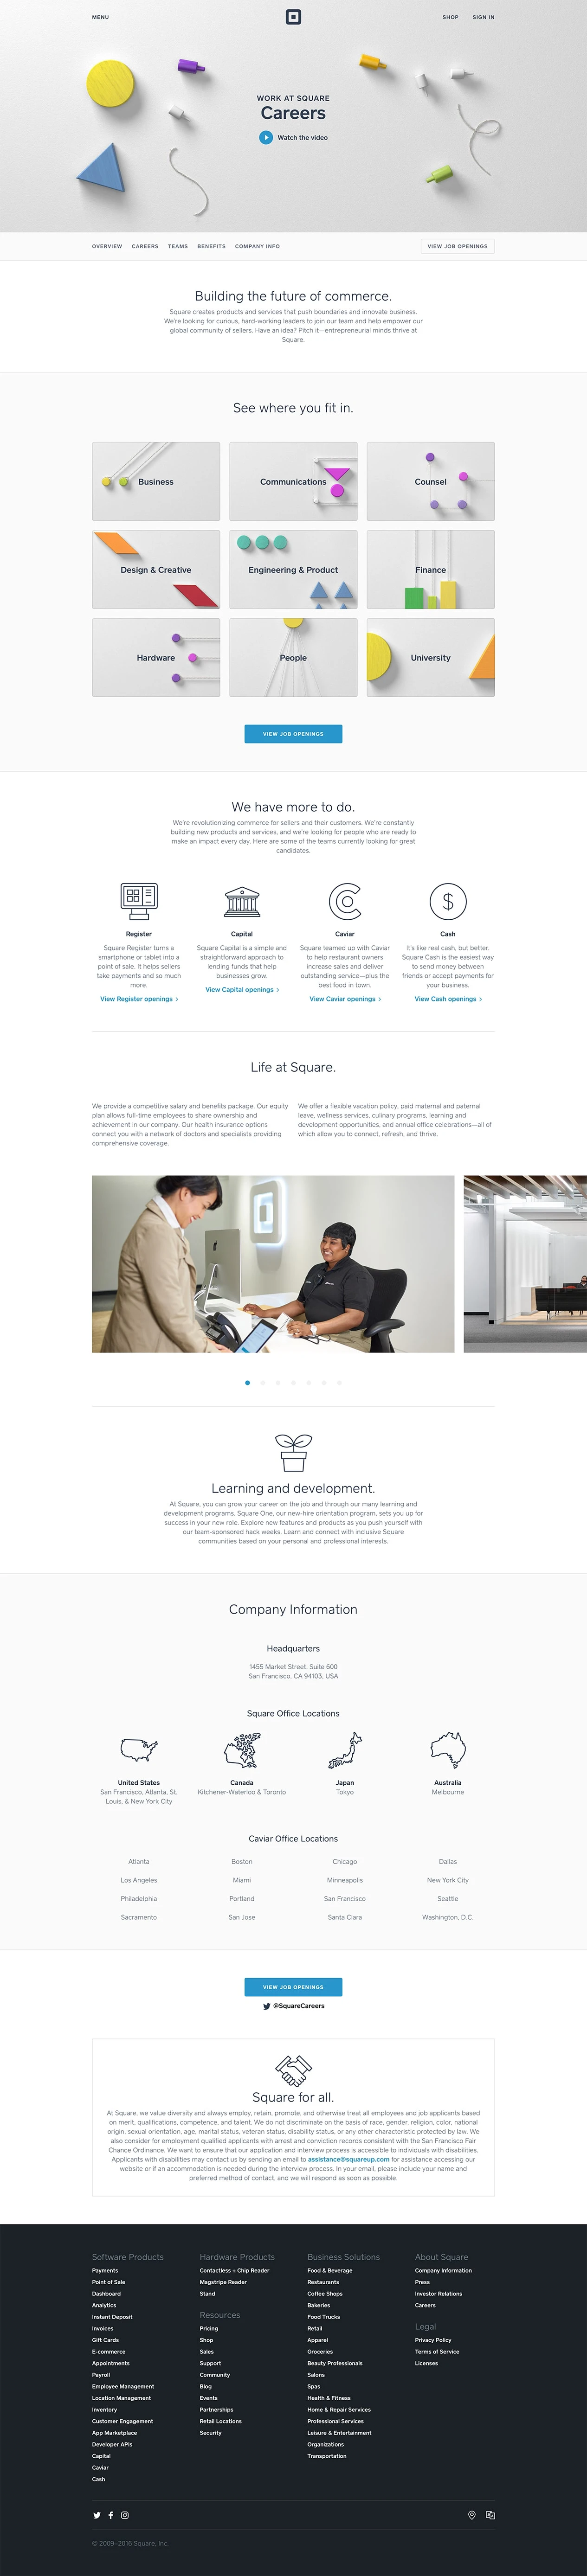 Work at Square - Careers Landing Page Example: Square creates products and services that push boundaries and innovate business.